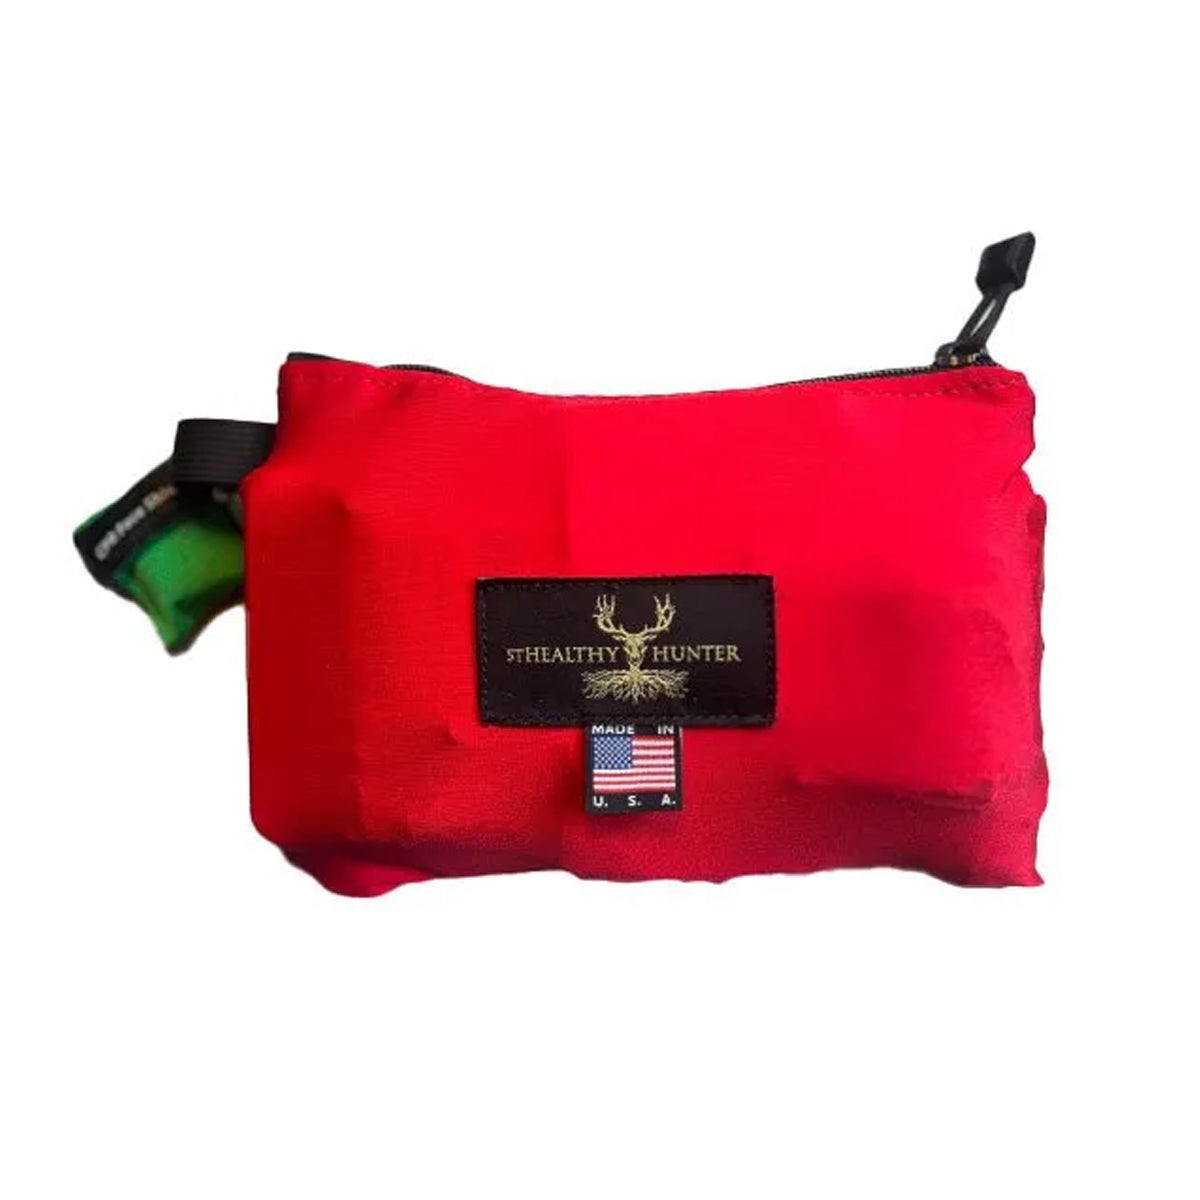 Sthealthy Hunter Backcountry Medical bag in  by GOHUNT | StHealthy Hunter - GOHUNT Shop